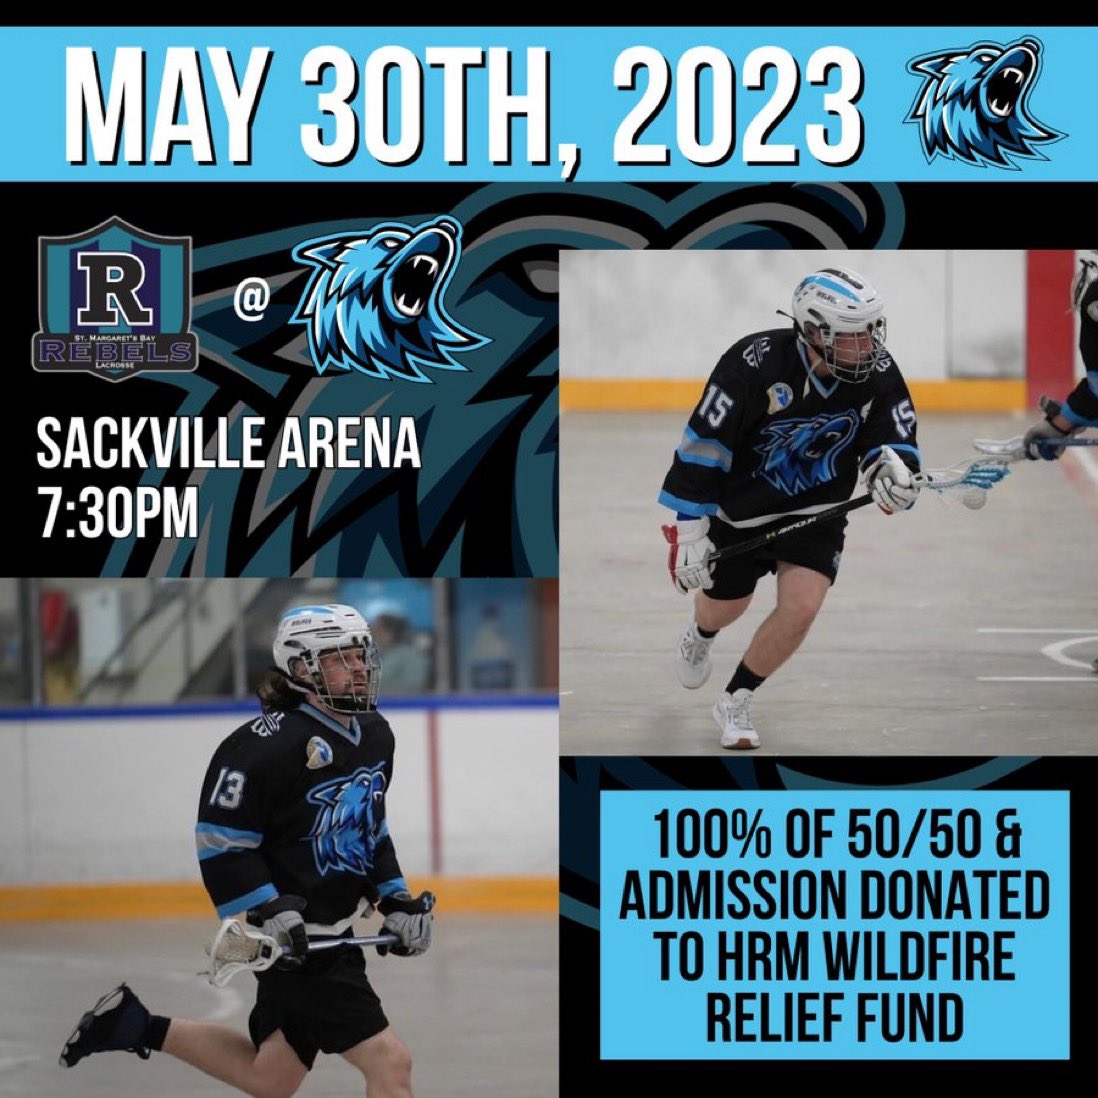 Our game against the St Margaret’s Bay Rebels will proceed as planned tonight. All admission and 50/50 proceeds as well as donations will go directly to HRM Wildfire Relief Fund on behalf of our Wolves & Rebels organizations. Doors open at 7 PM 💙🐺🥍 #runwiththewolves